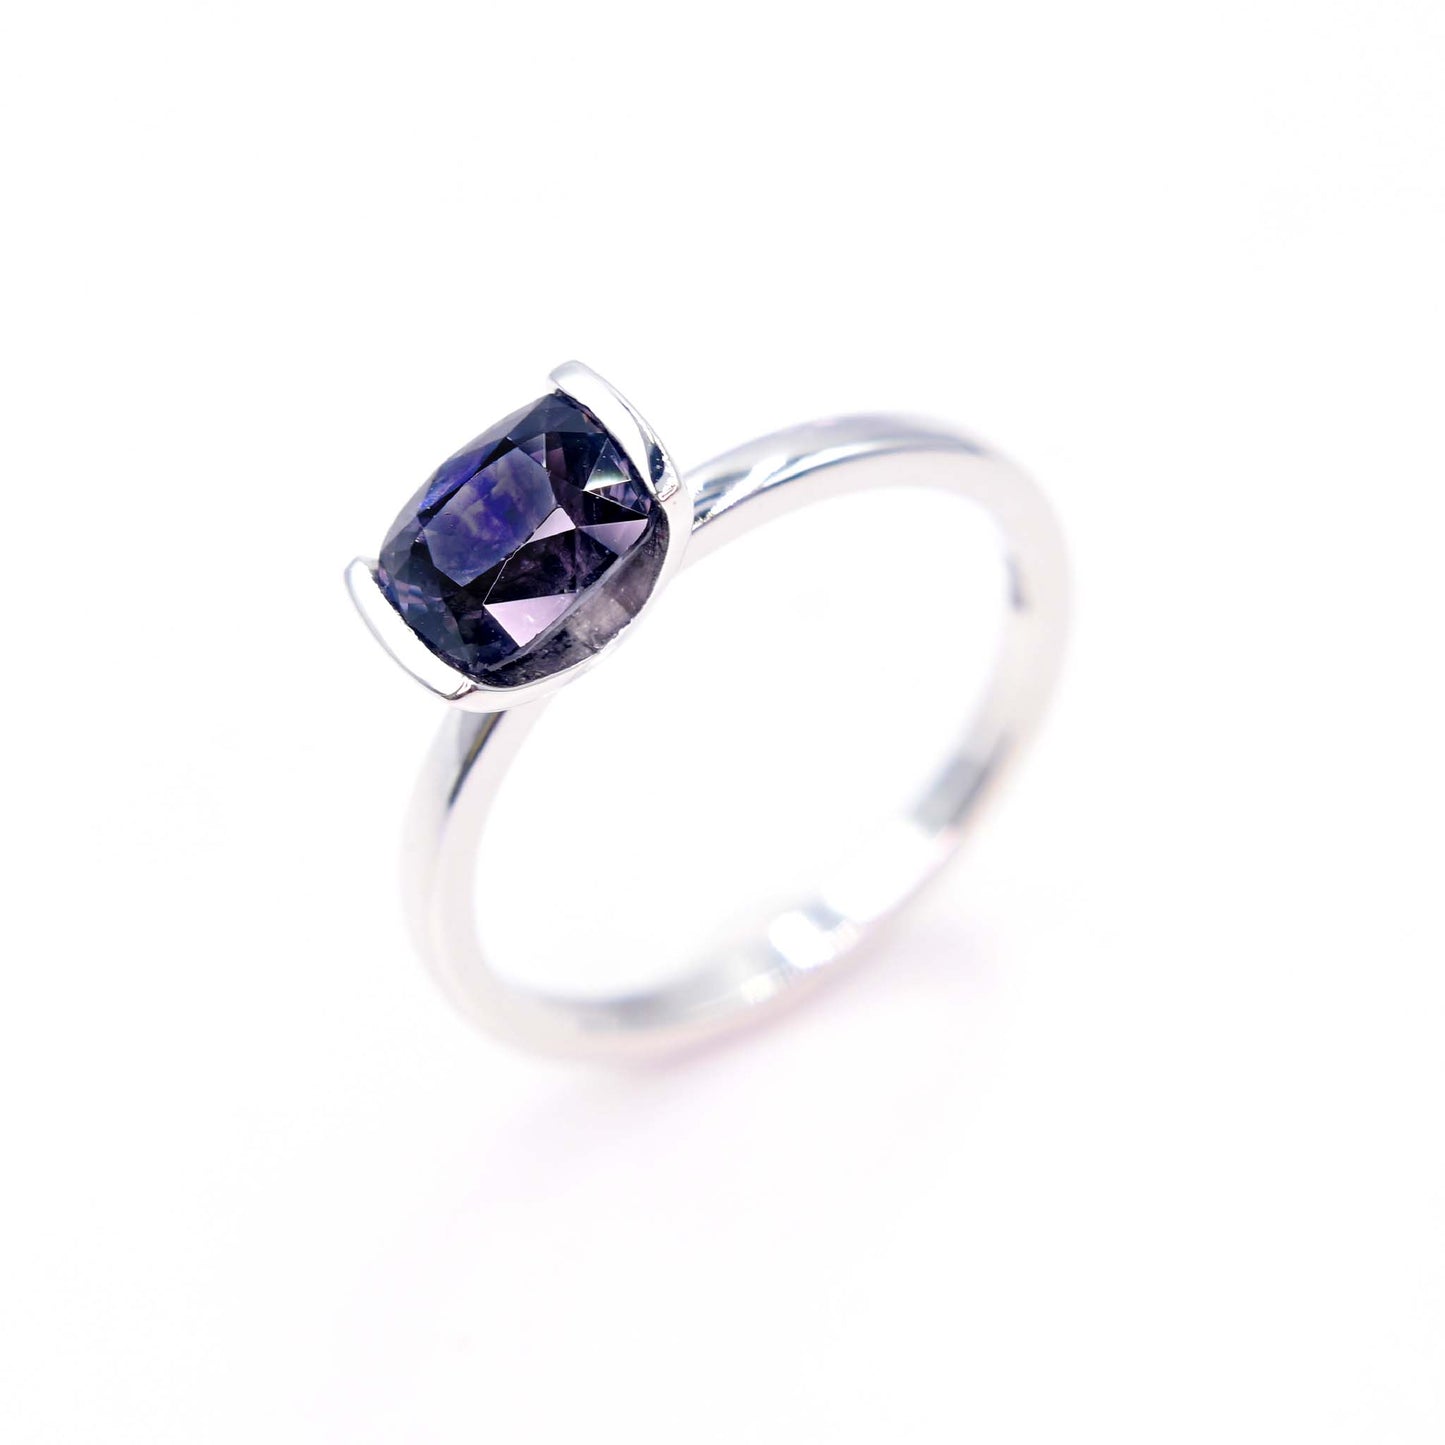 Handmade spinel ring with 14k white gold 